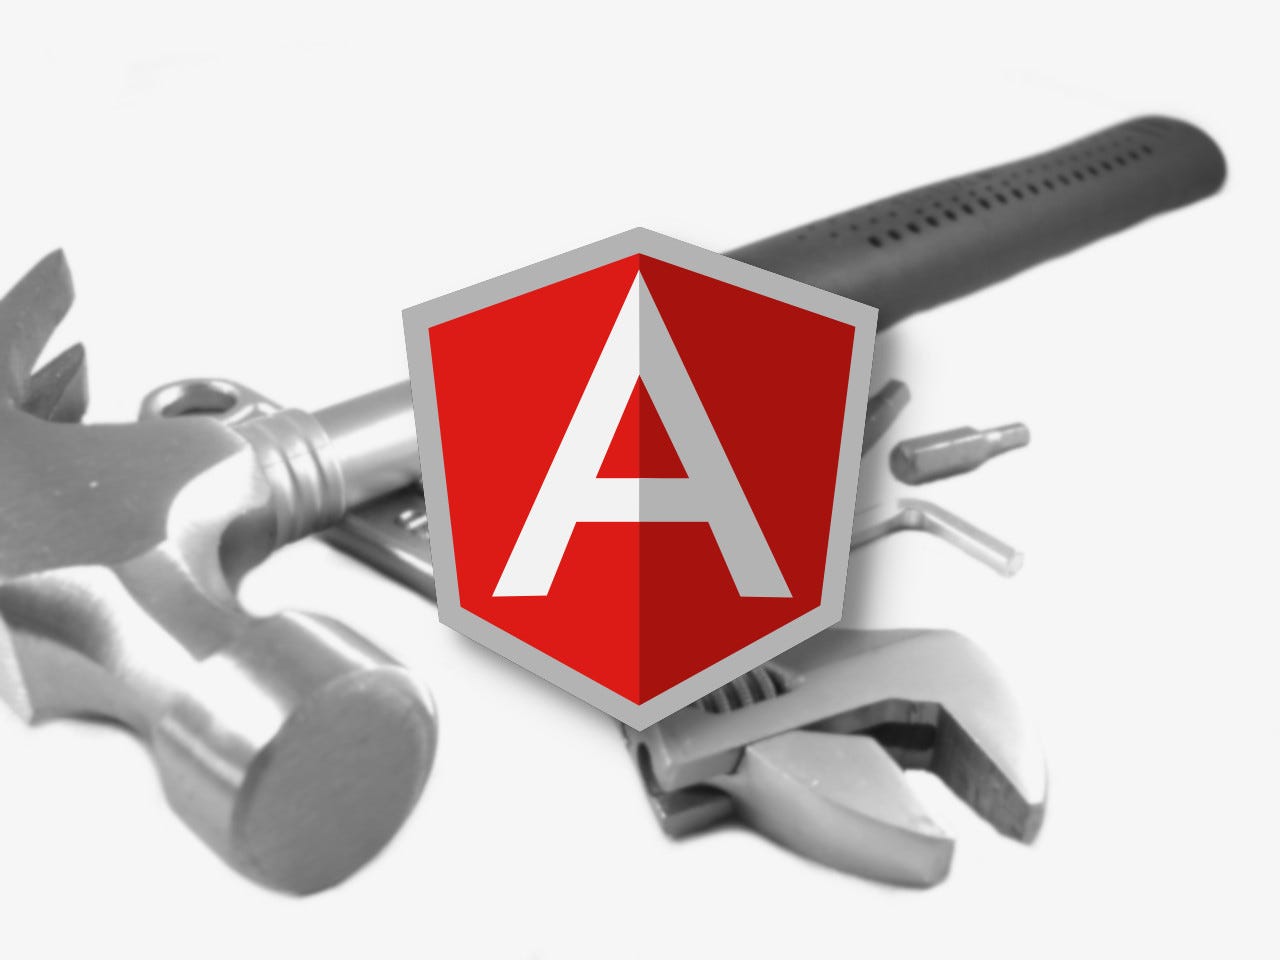 11 Top Angular Developer Tools for 2020 by Buomprisco | Bits and Pieces